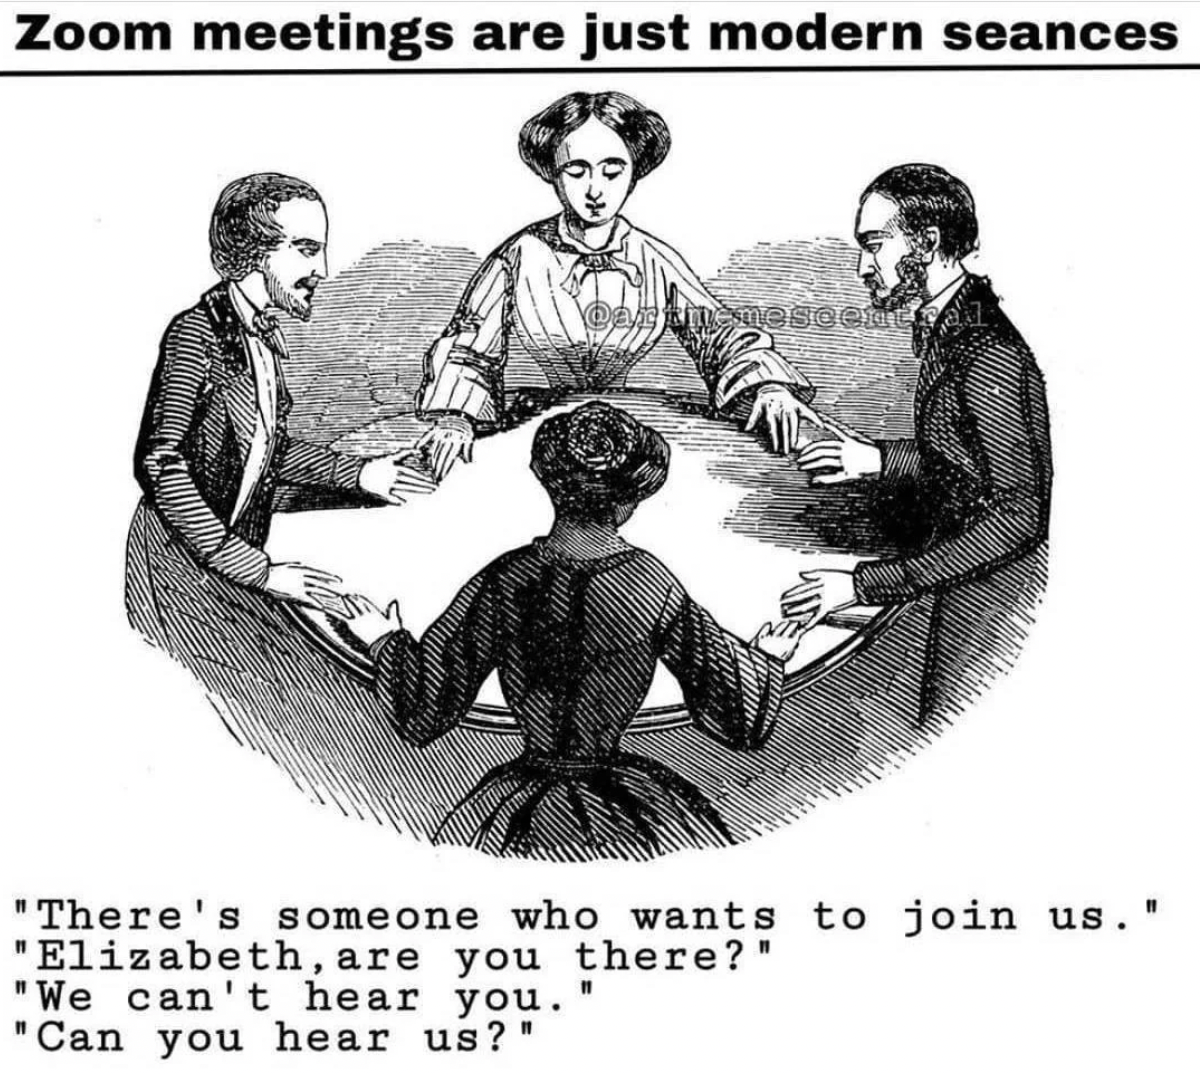 zoom meetings are just modern seances - Zoom meetings are just modern seances astne mesoentral "There's someone who wants to join us." "Elizabeth, are you there?" "We can't hear you. "Can you hear us?" 11